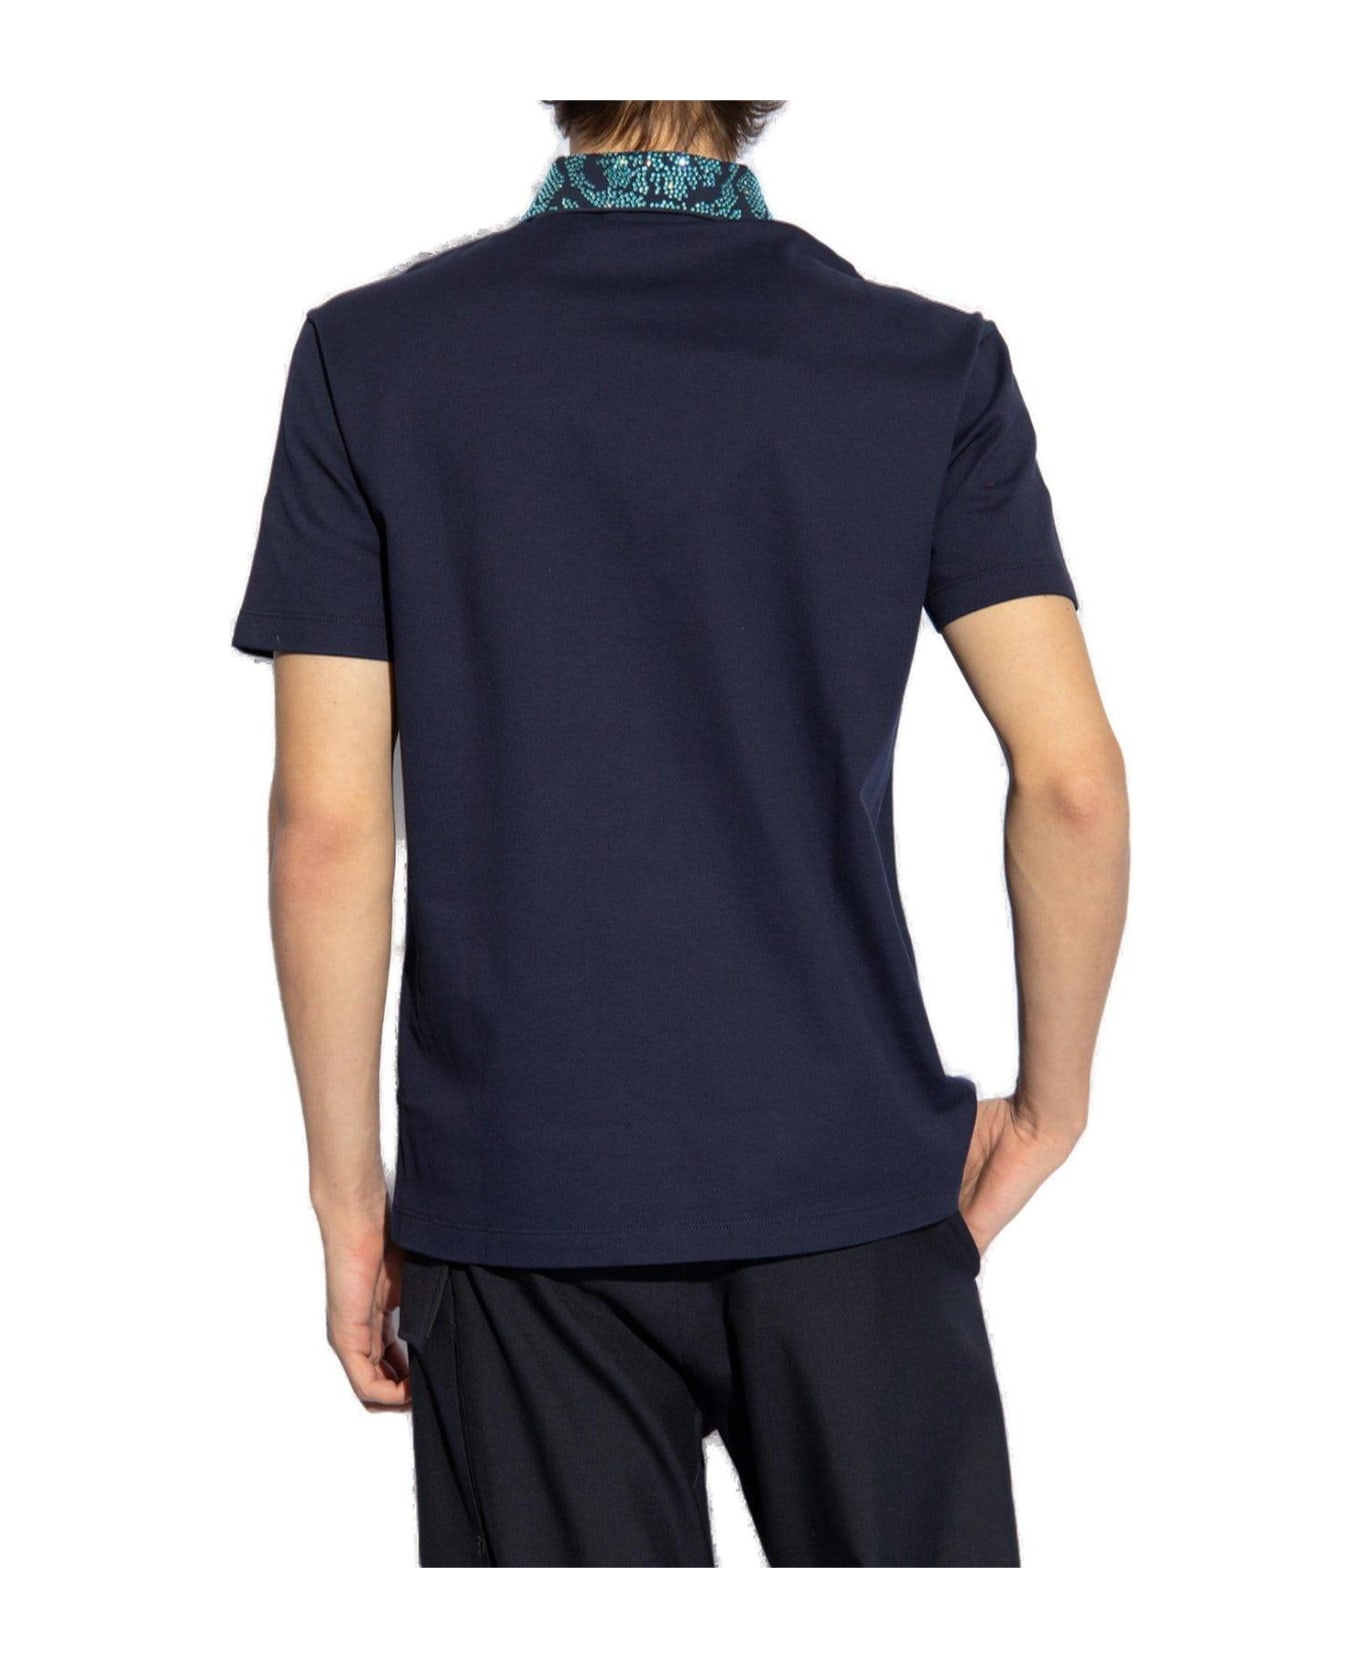 Versace Glass Embellished Short-sleeved Polo Shirt - BLUE シャツ